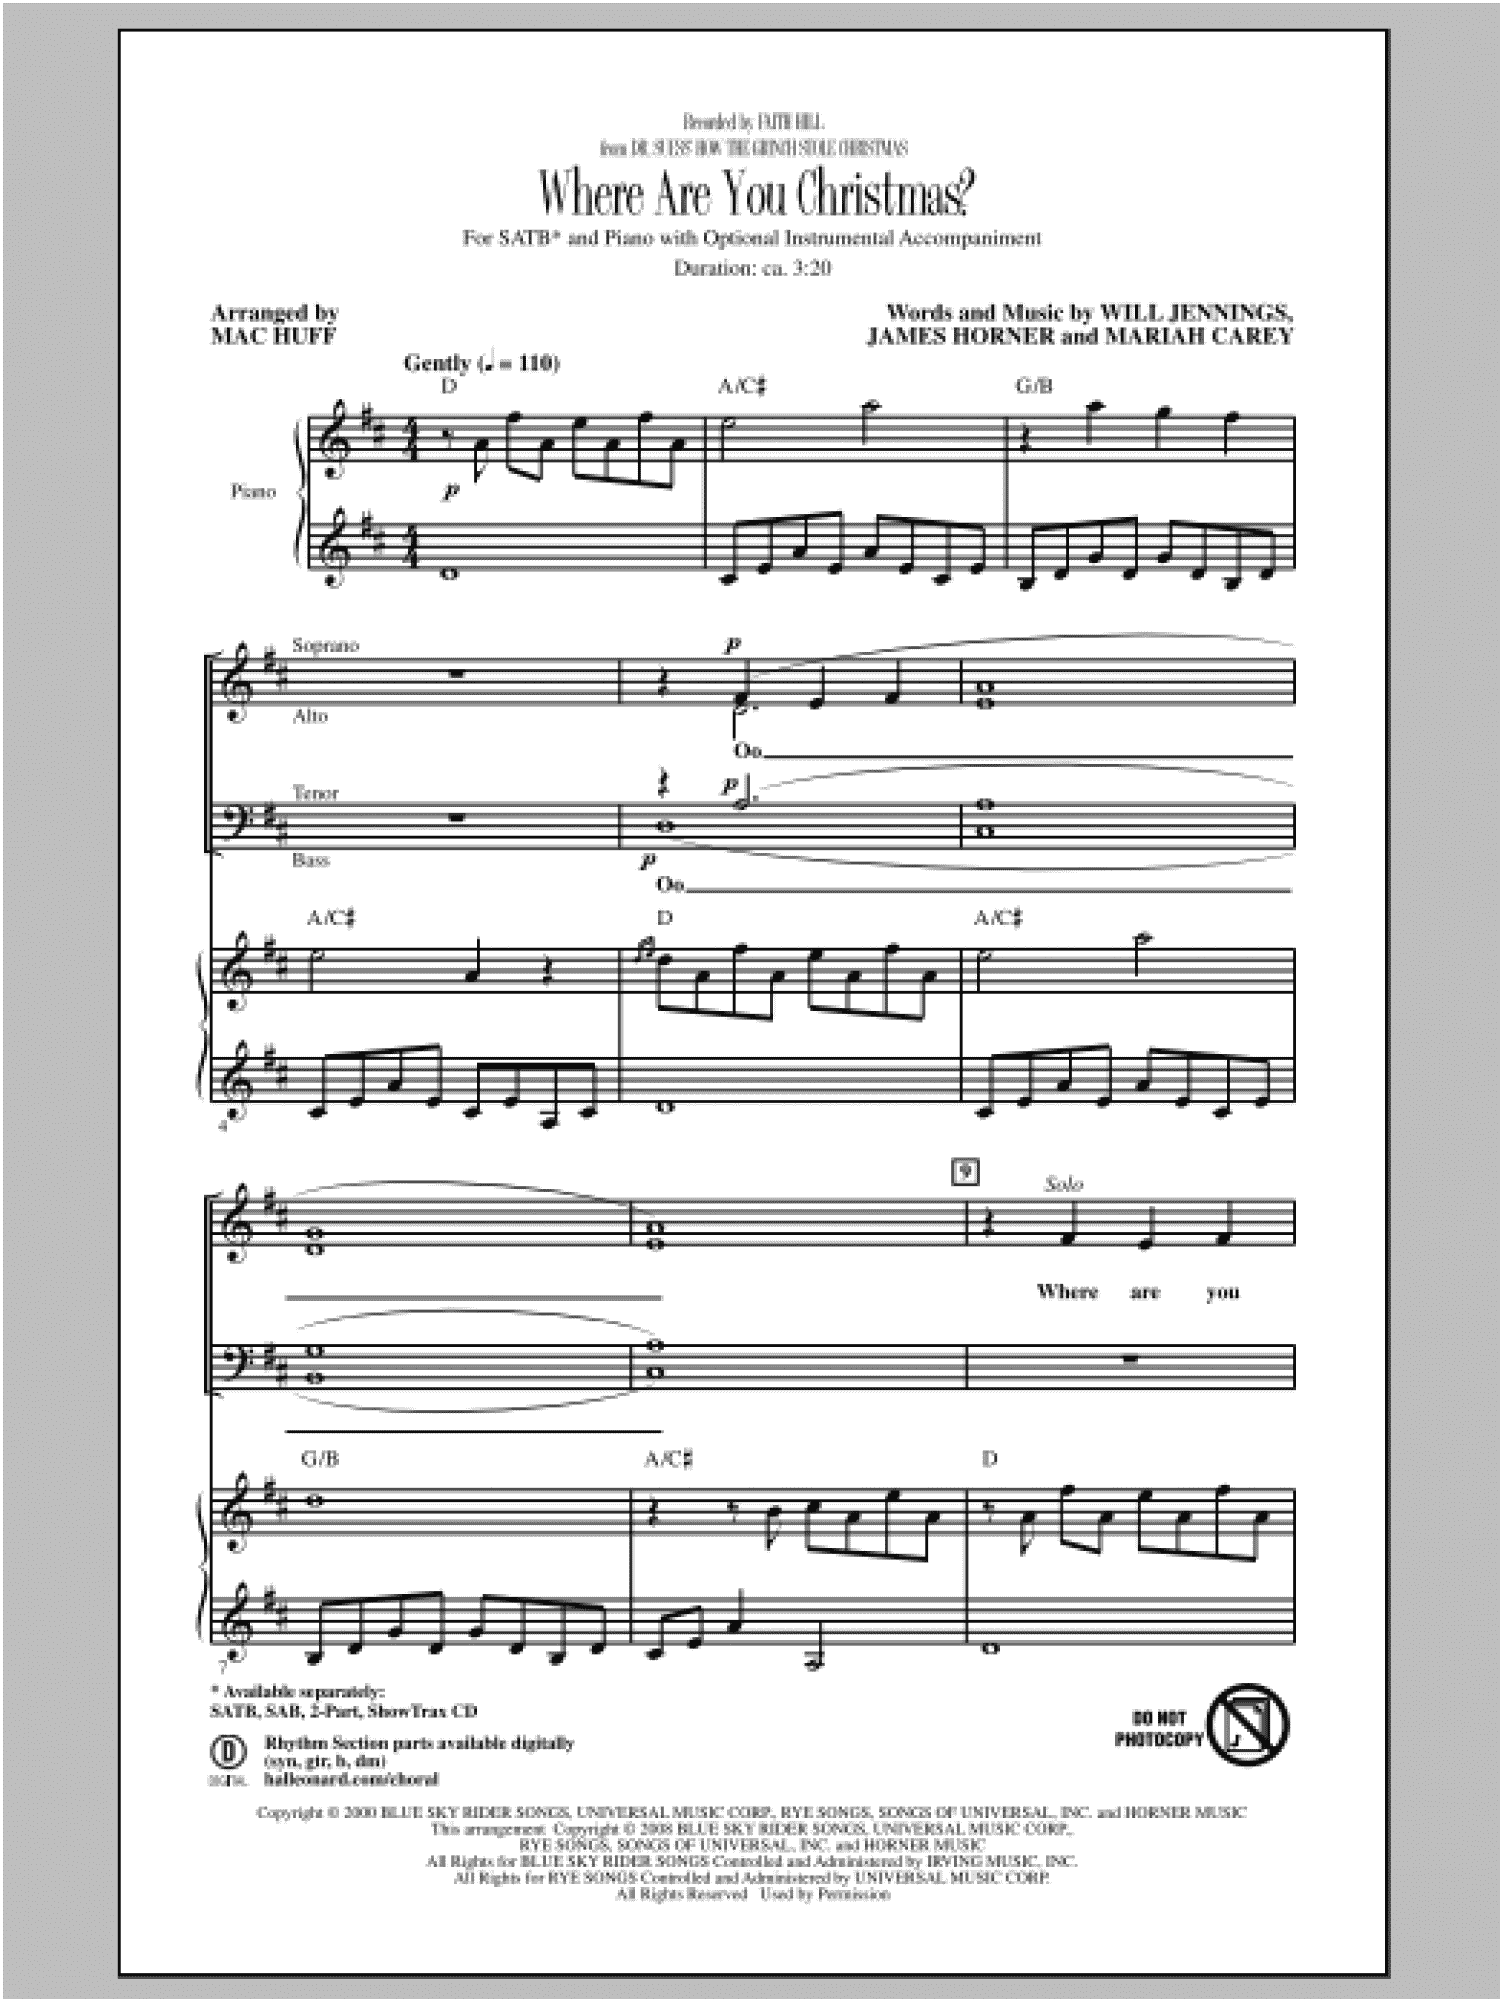 Where Are You Christmas? (arr. Mac Huff) (from How The Grinch Stole Christmas) (SATB Choir)